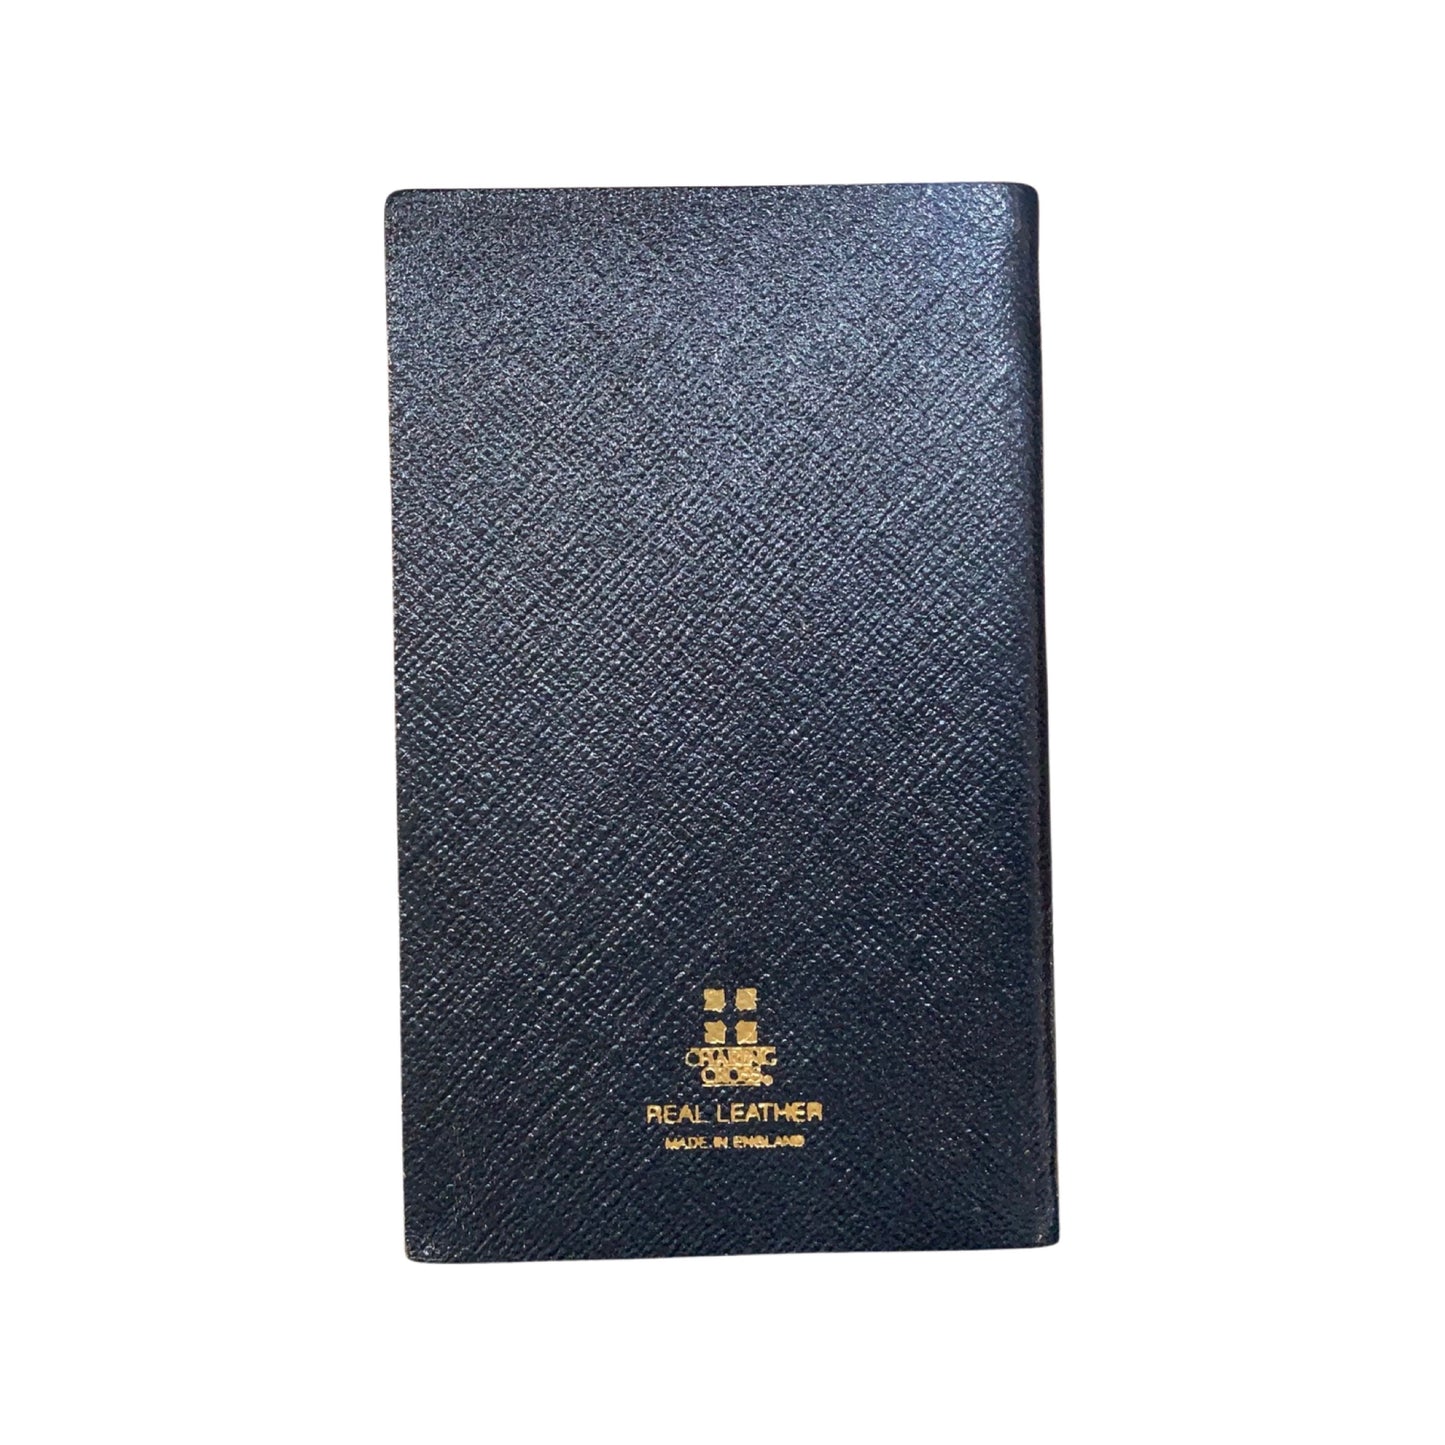 Address Book | 5 by 3 inches | Crossgrain Leather | Charing Cross Leather No.A53L